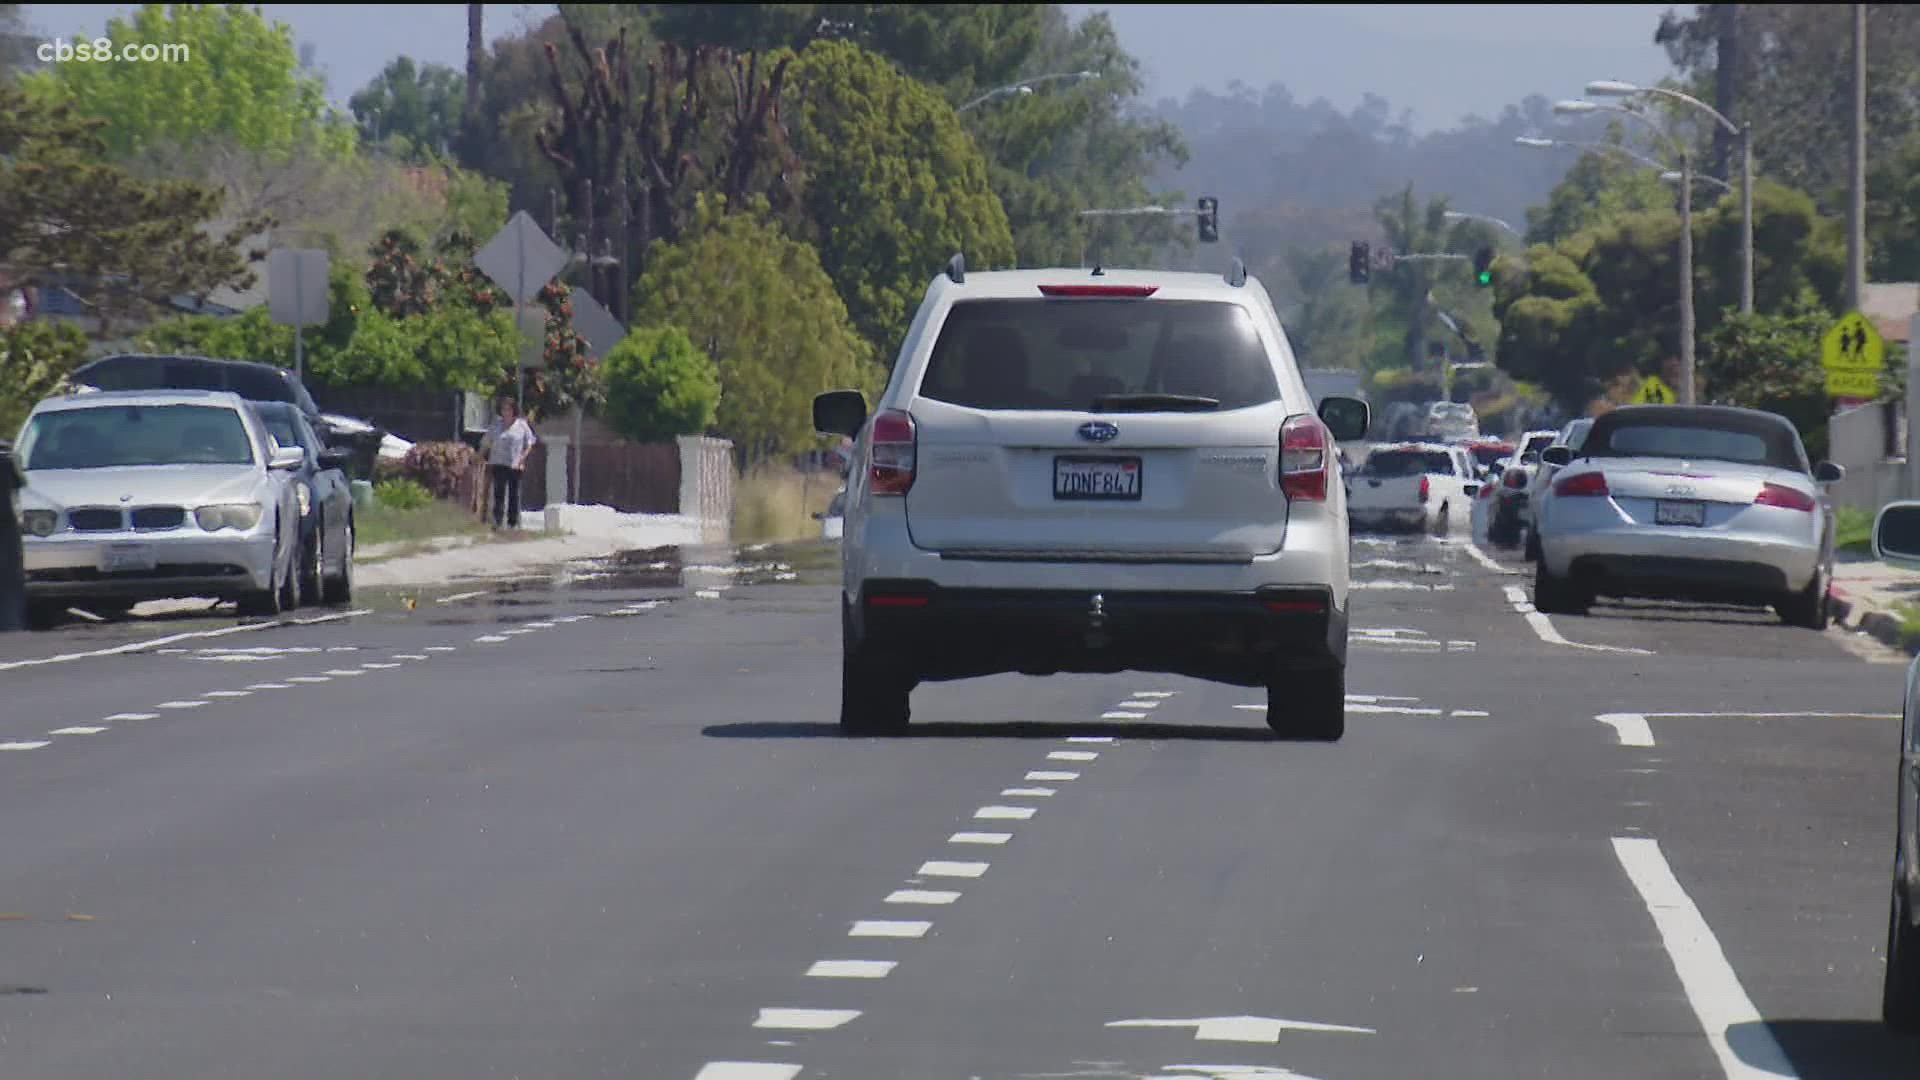 CBS 8 is working to get answers to questions about the new advisory bike lanes recently installed in Mira Mesa.